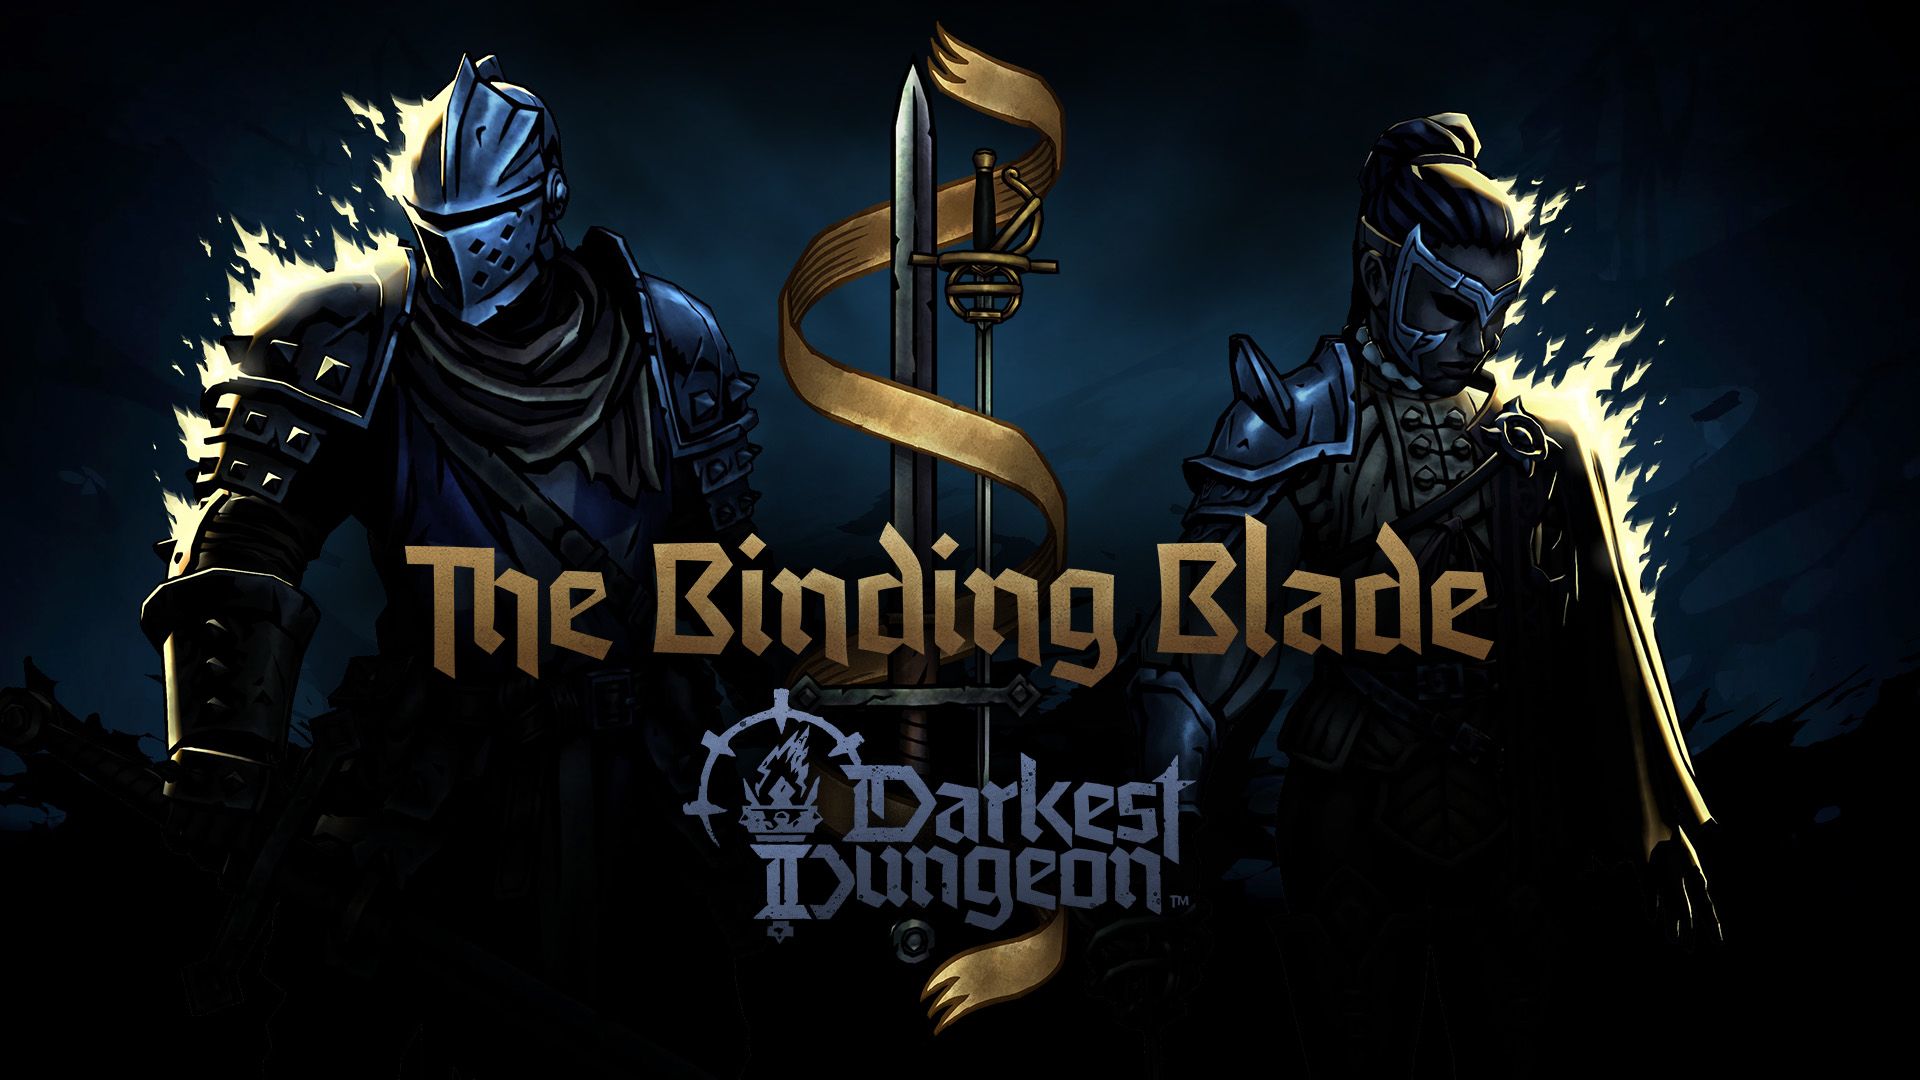 Discover "The Binding Blade" - Darkest Dungeon II's First DLC, Featuring Two Unique Playable Heroes